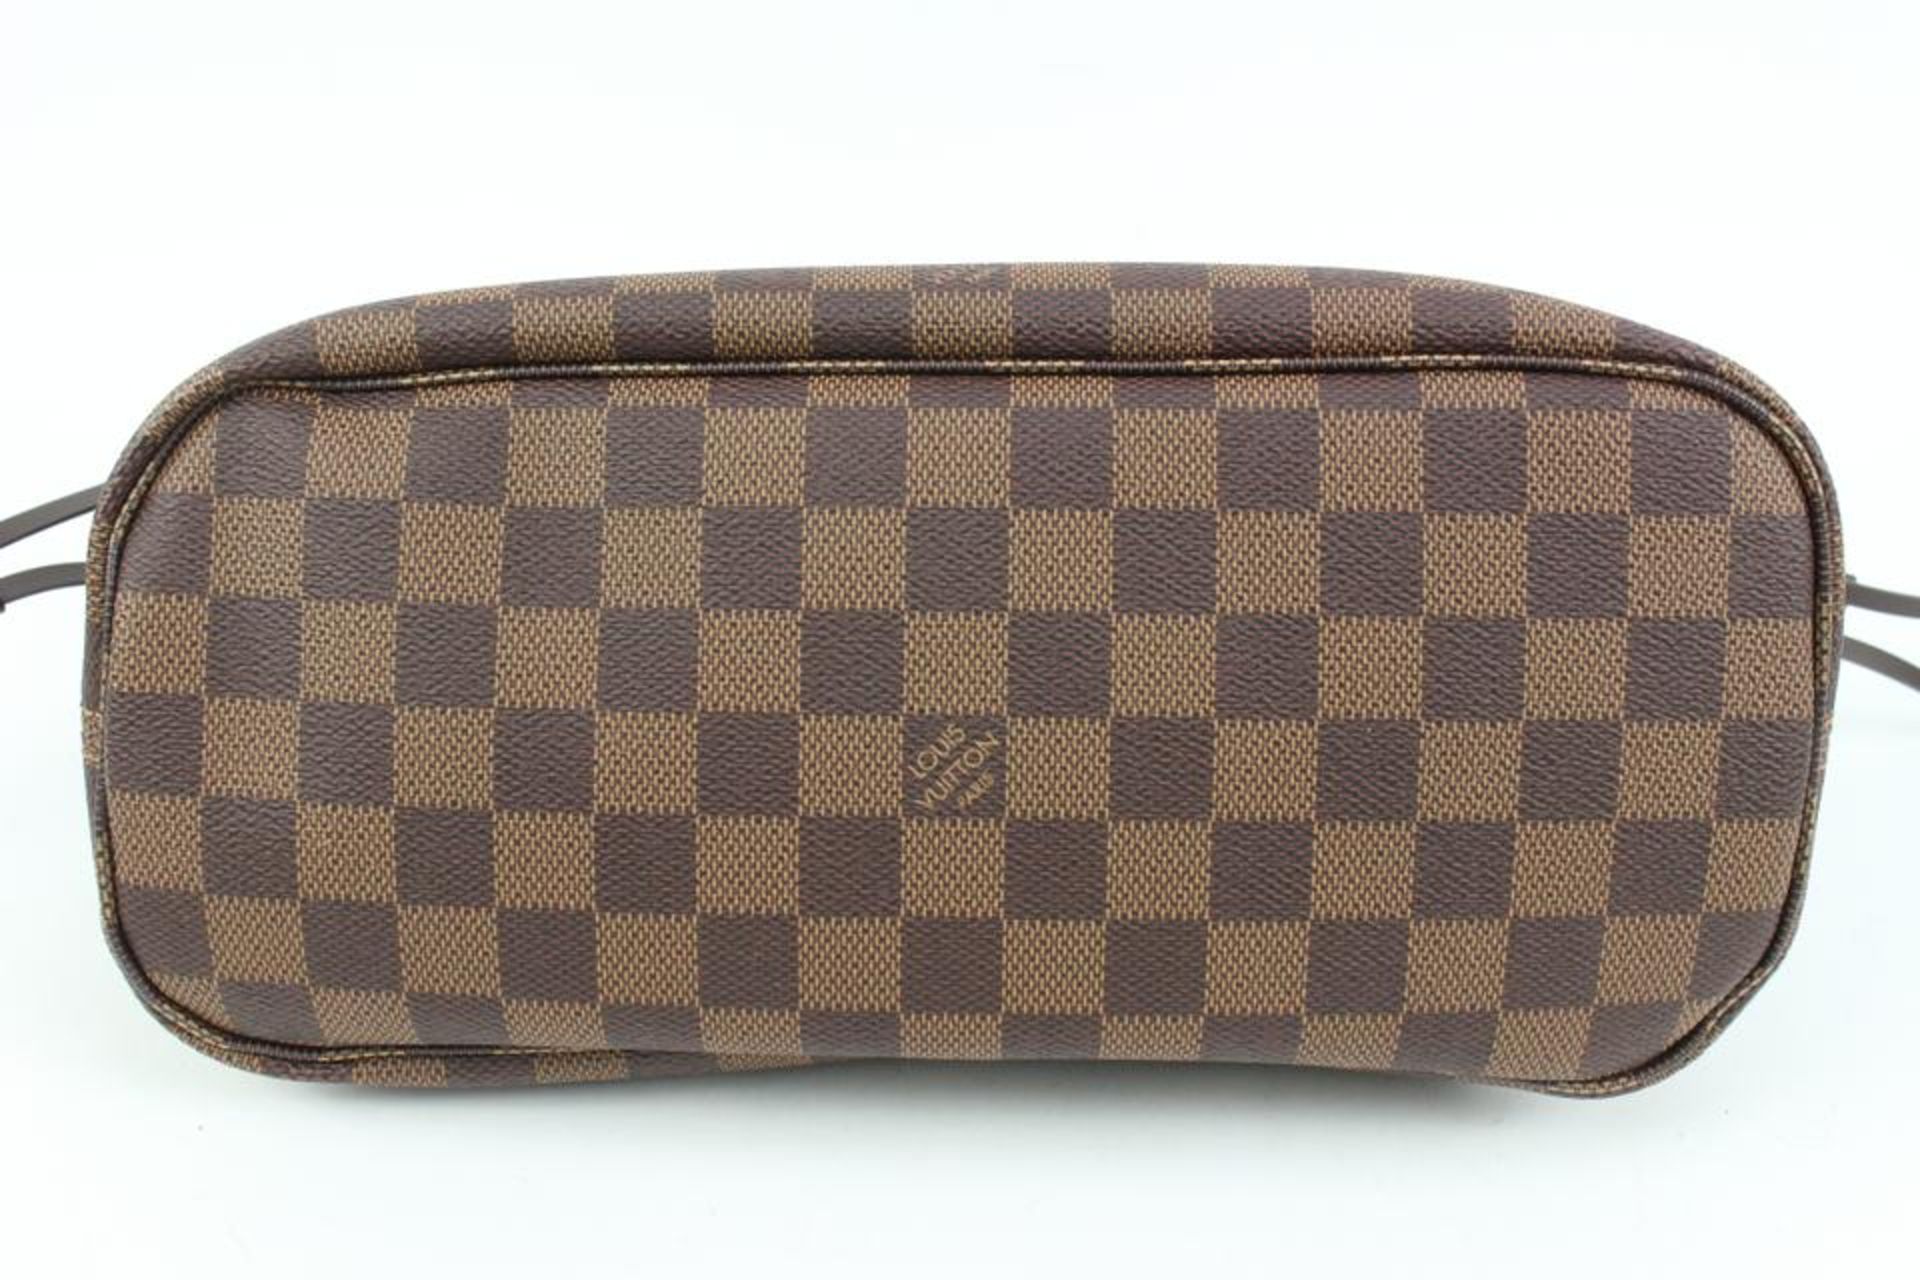 LOUIS VUITTON SMALL DAMIER EBENE NEVERFULL PM TOTE BAG - Image 3 of 11